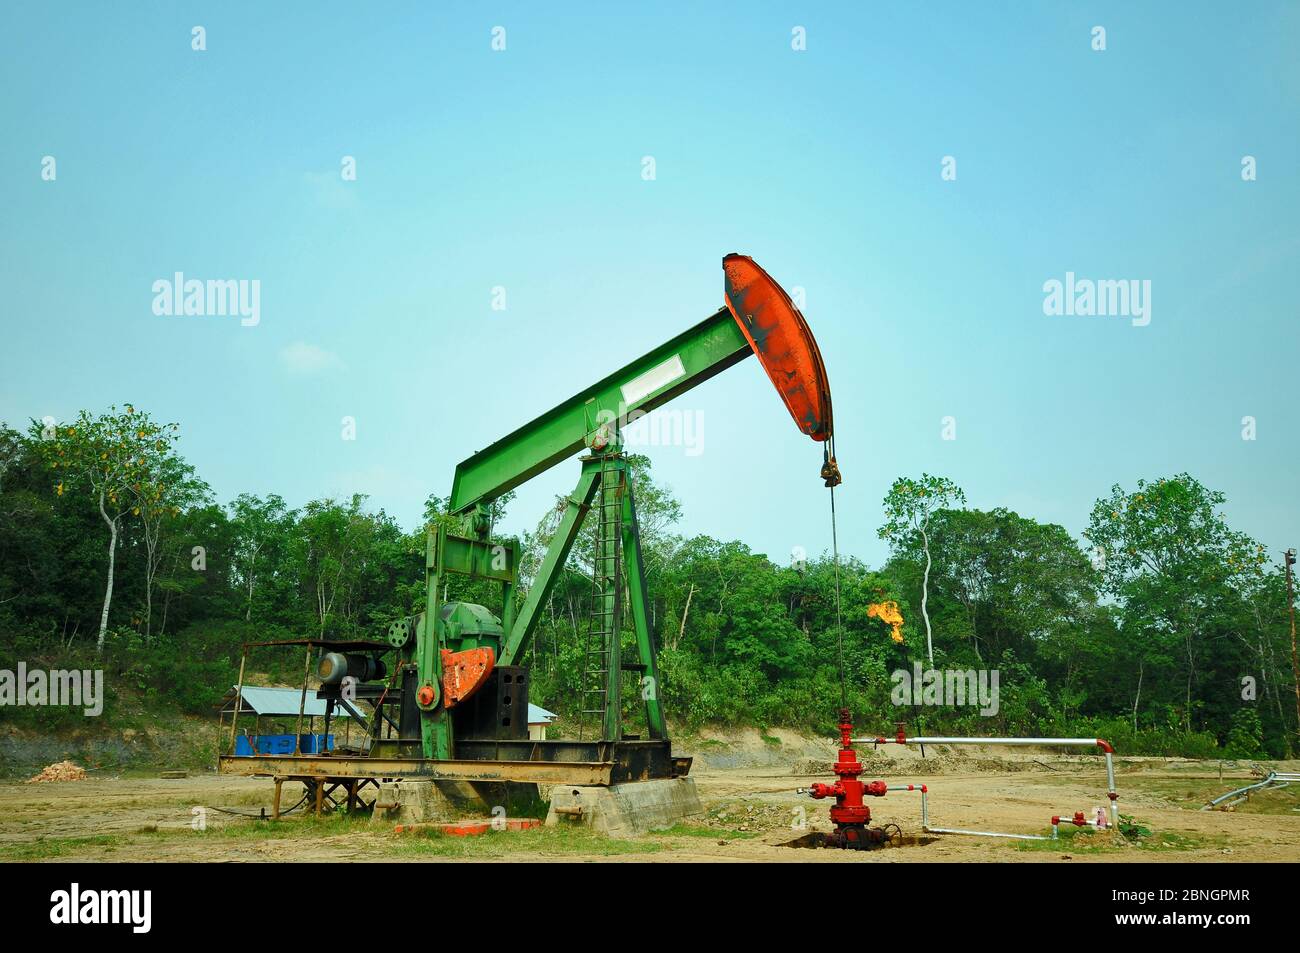 Pumpjack pumping crude oil from oil well Stock Photo